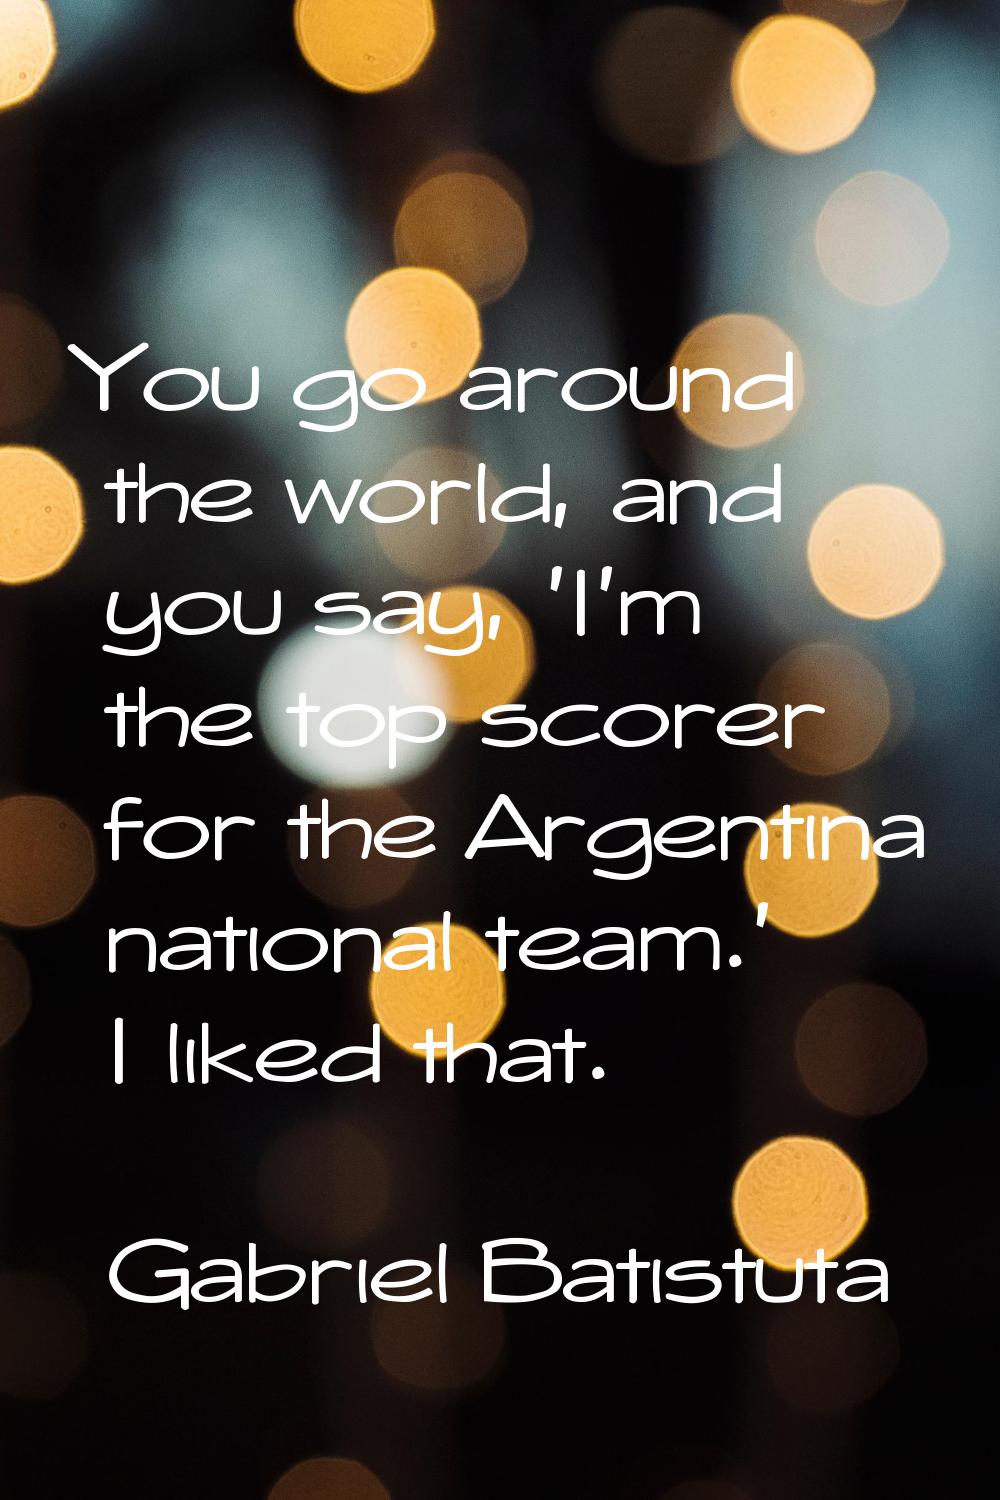 You go around the world, and you say, 'I'm the top scorer for the Argentina national team.' I liked